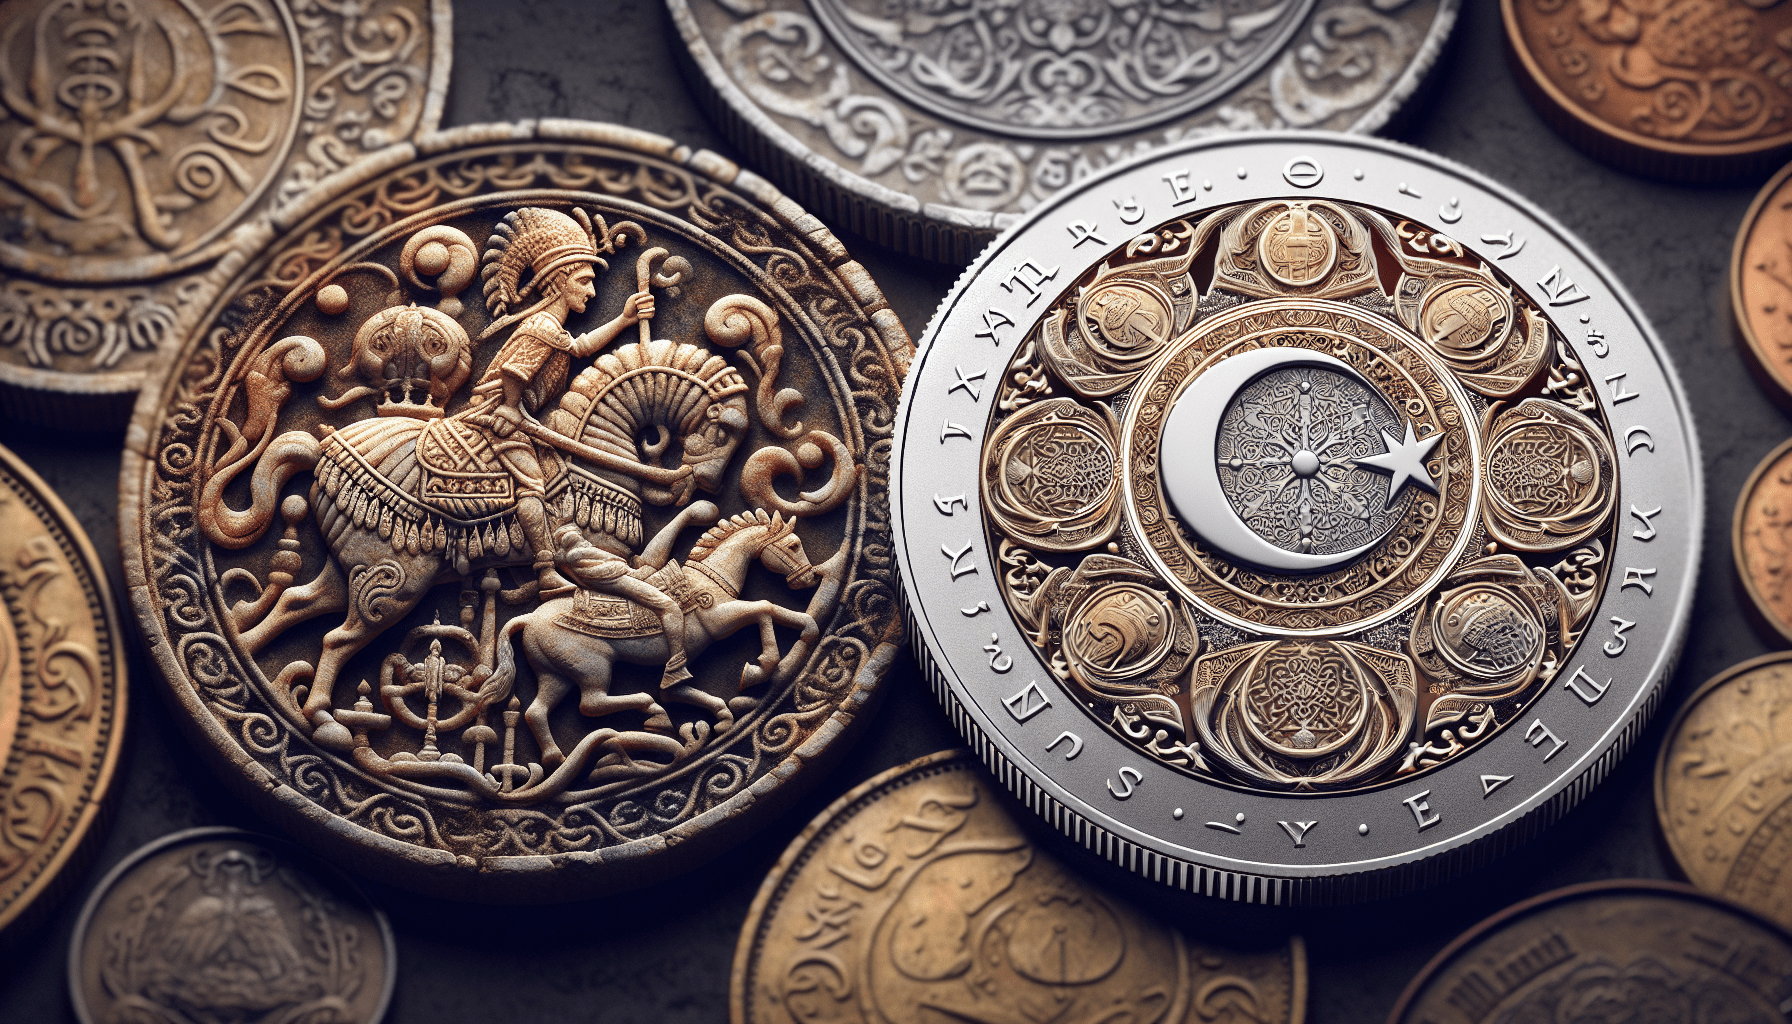 A variety of intricately designed coins are displayed. The two prominent coins feature detailed symbols, one depicting a knight on horseback and the other showcasing a crescent moon with a star and tree, reminiscent of Turkey's rich cultural heritage.